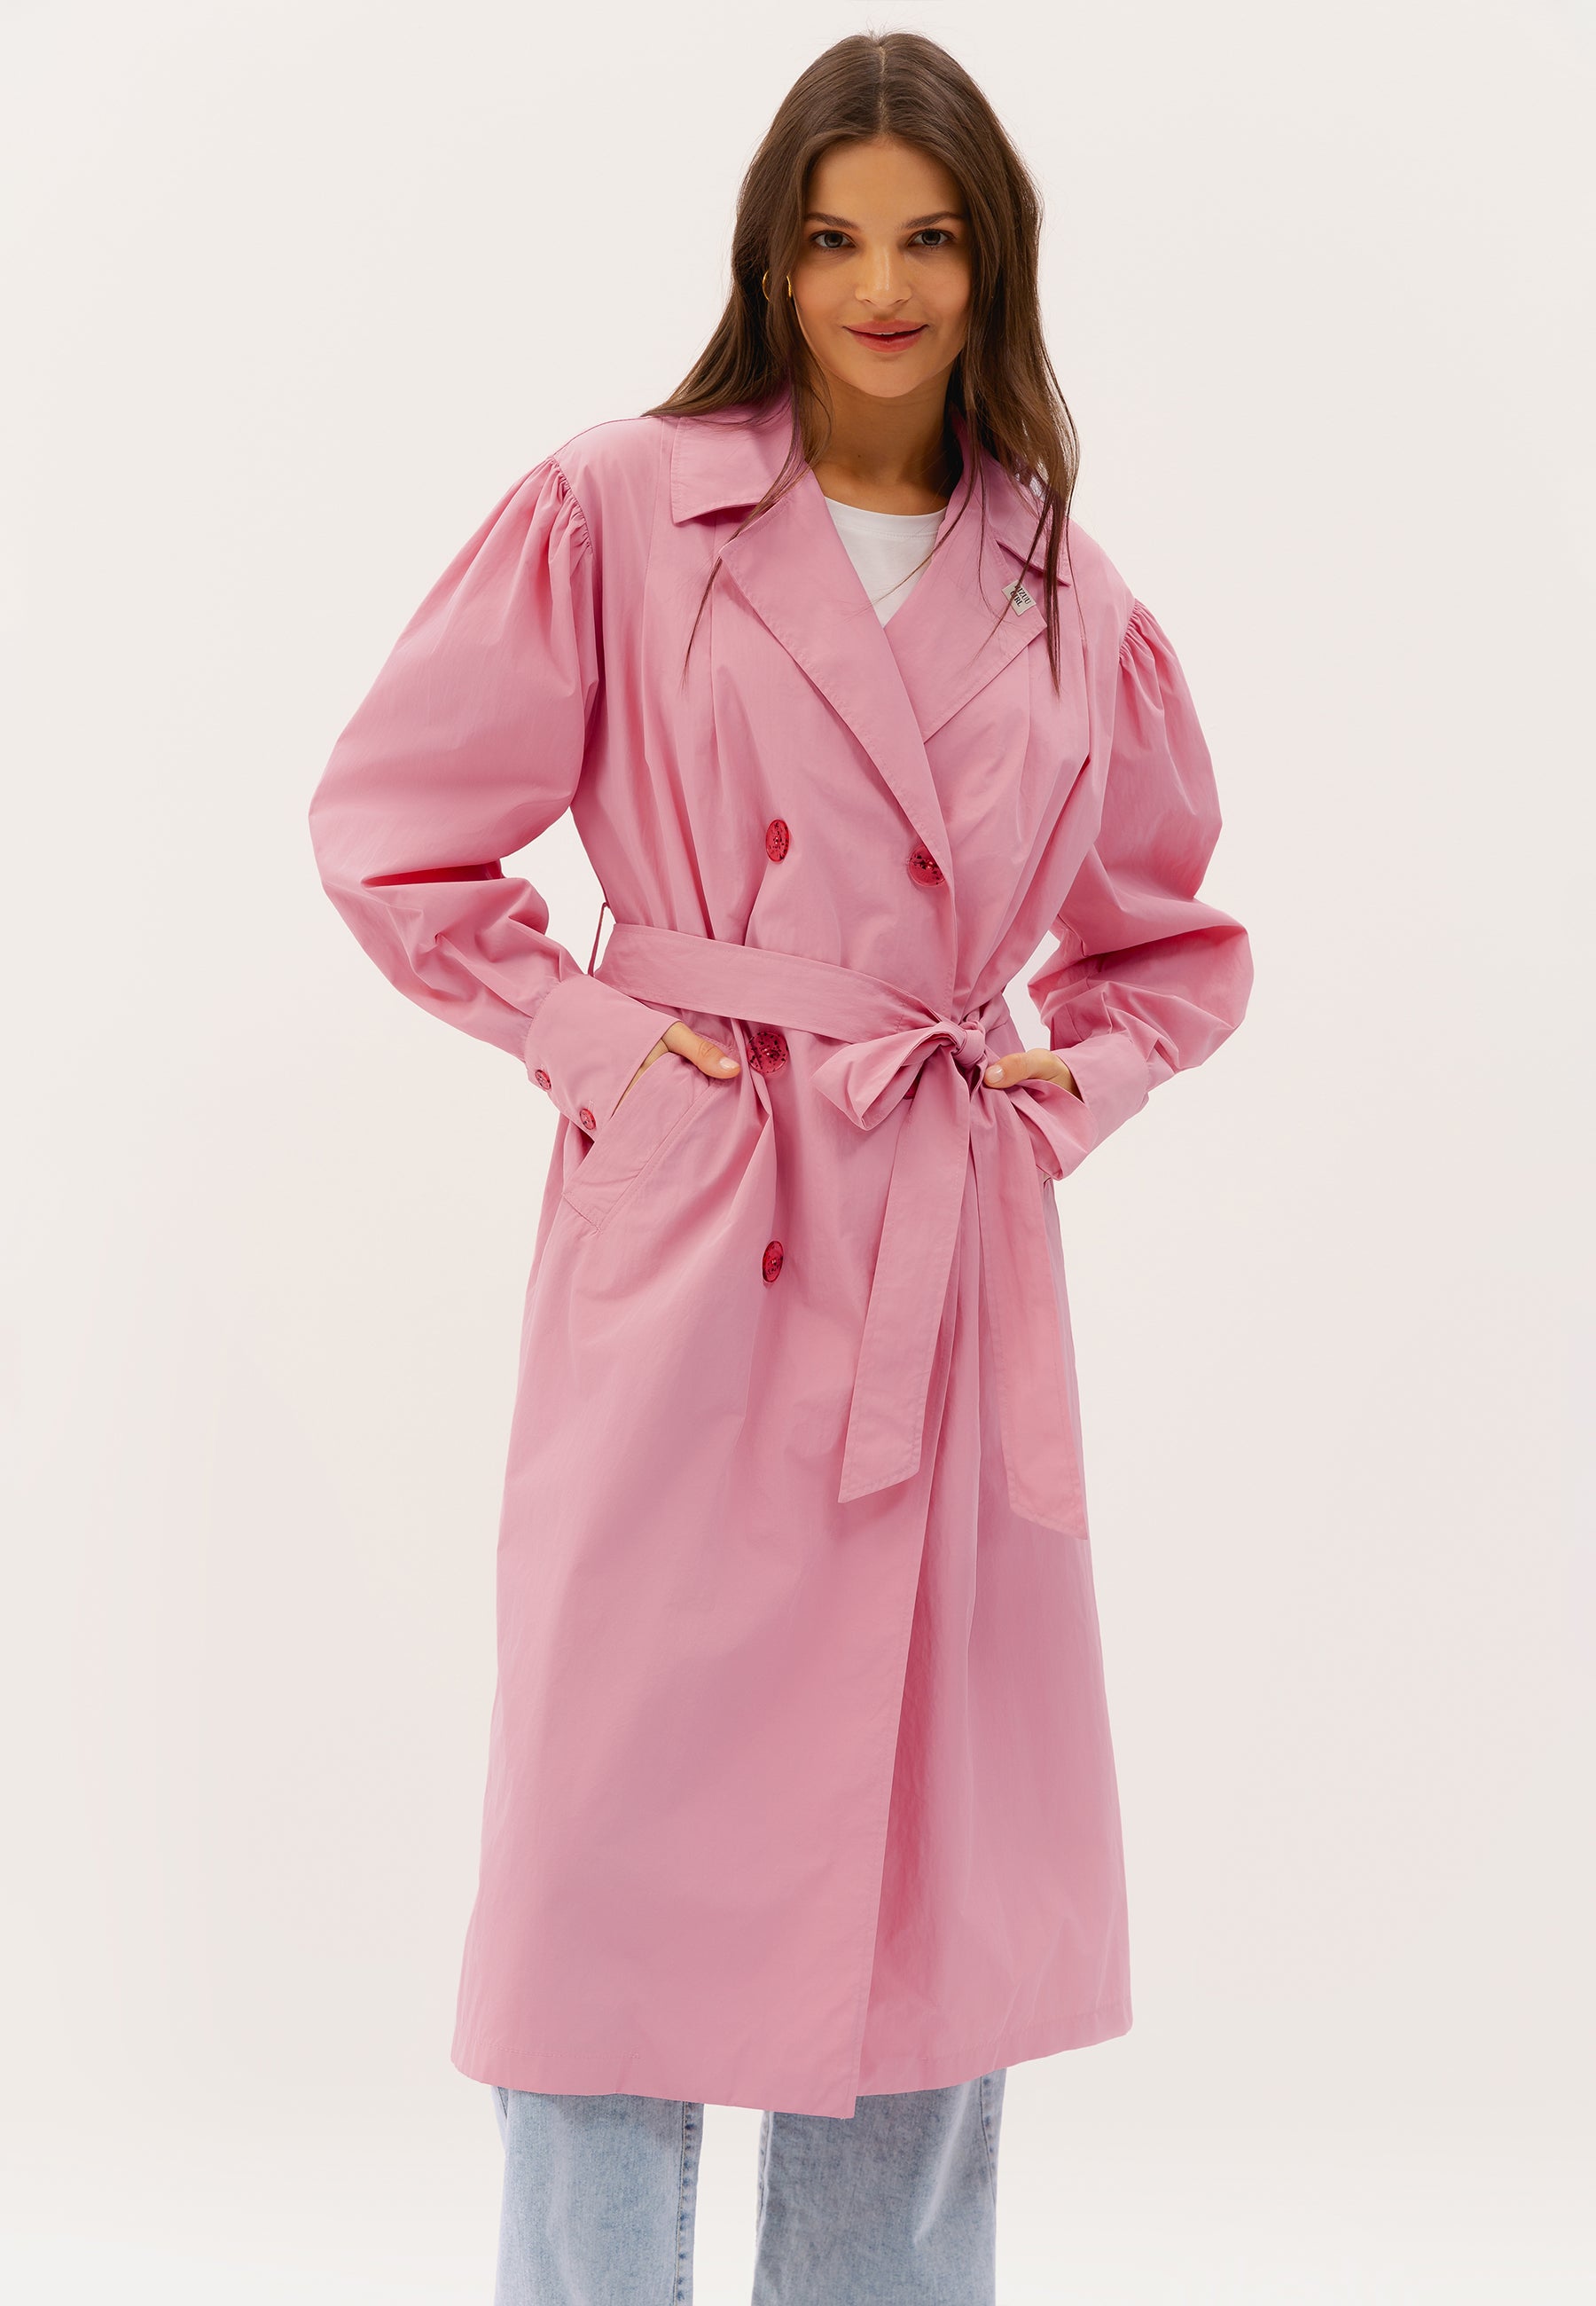 DORSY double-breasted trench, pink